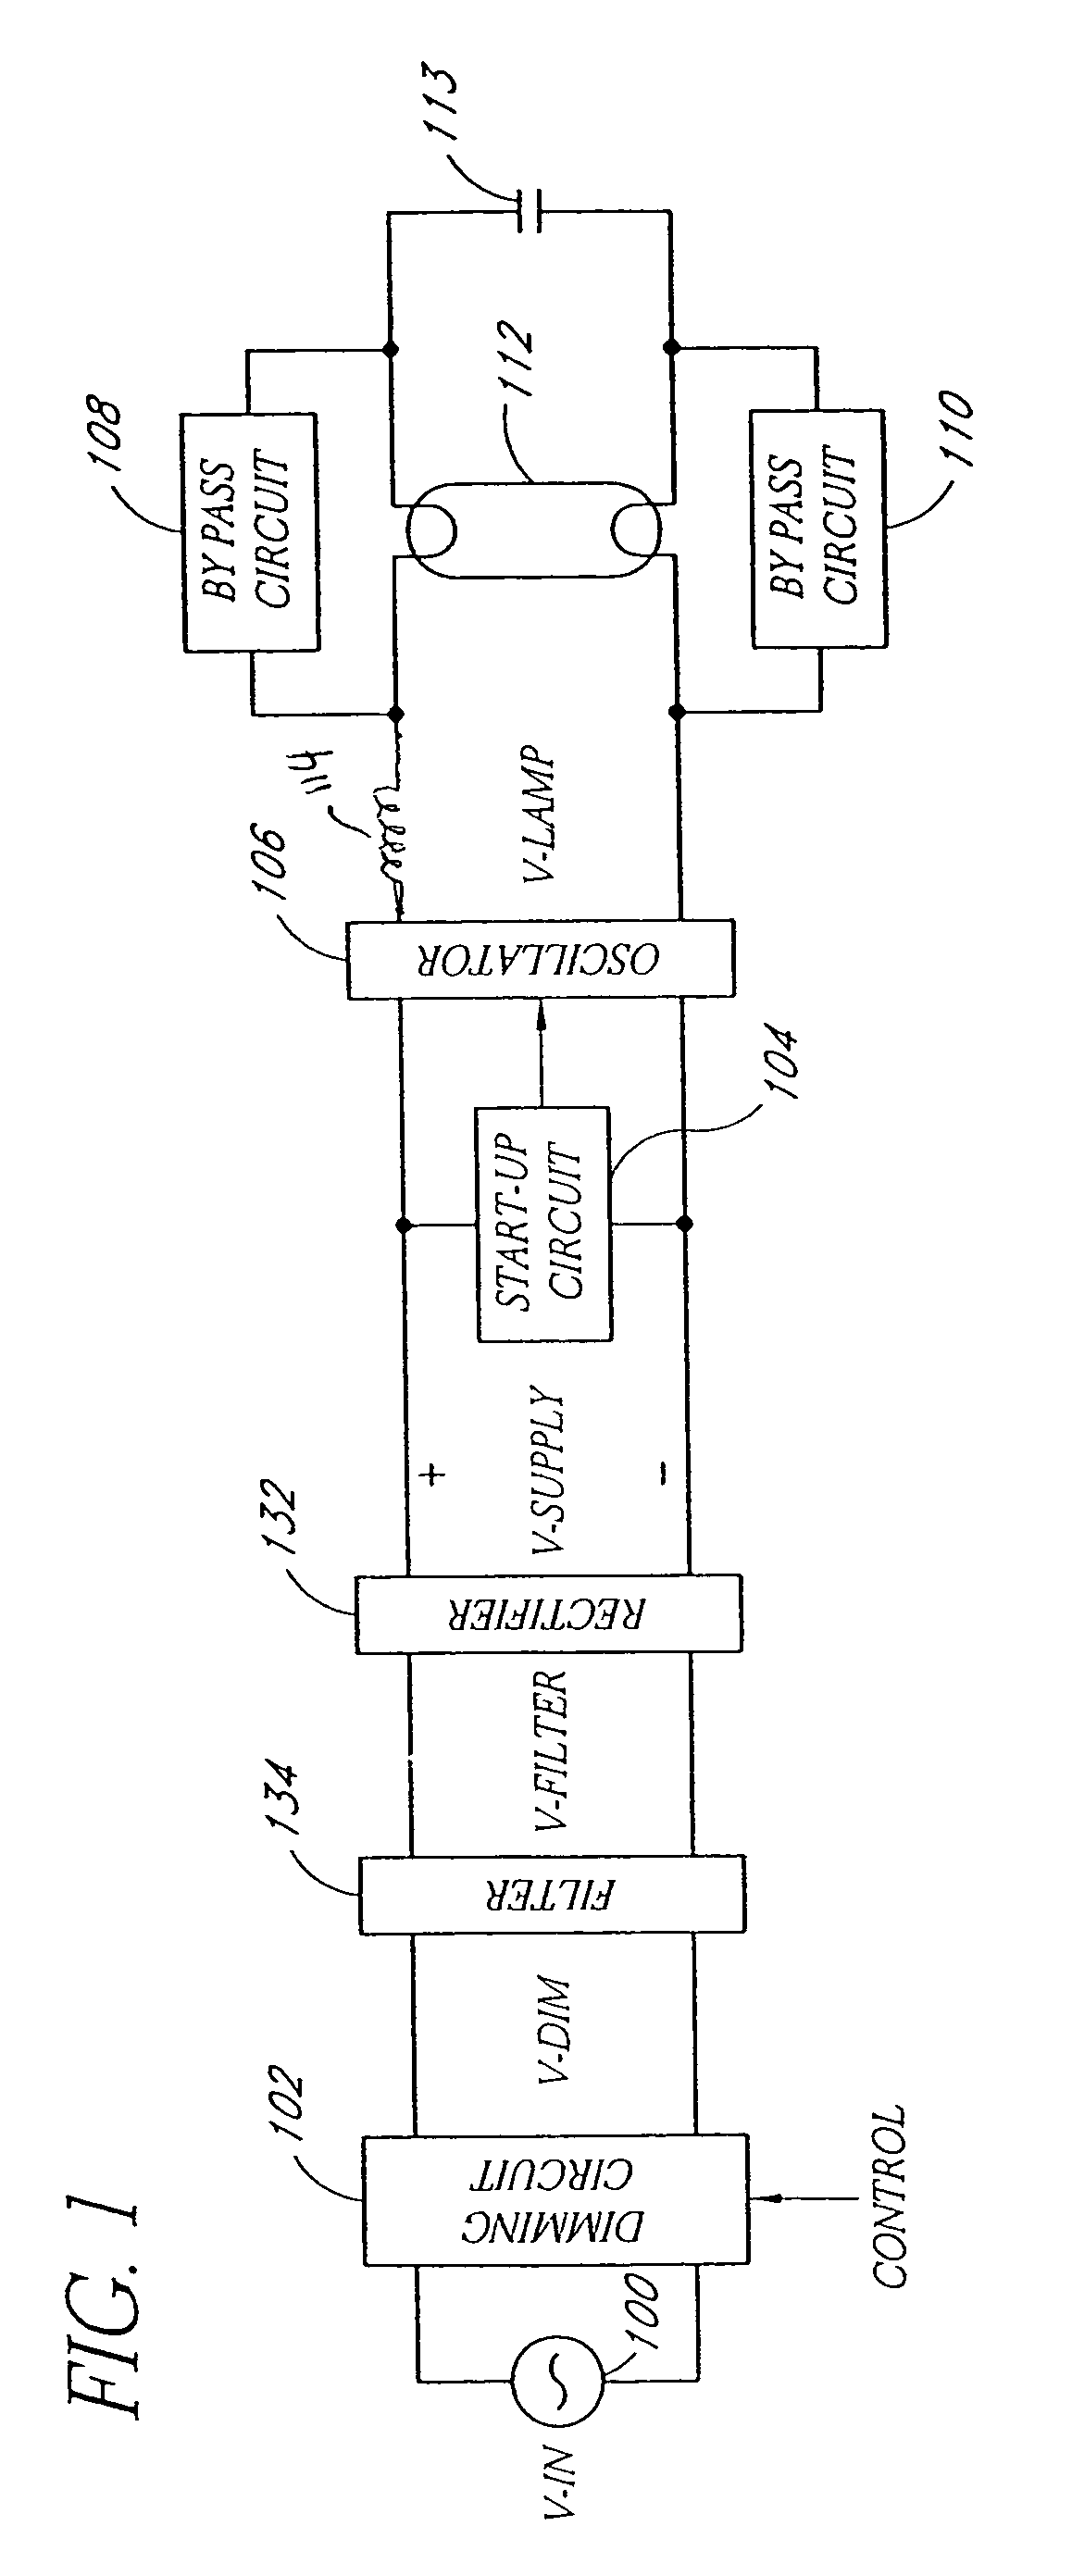 Method and apparatus for lighting a discharge lamp